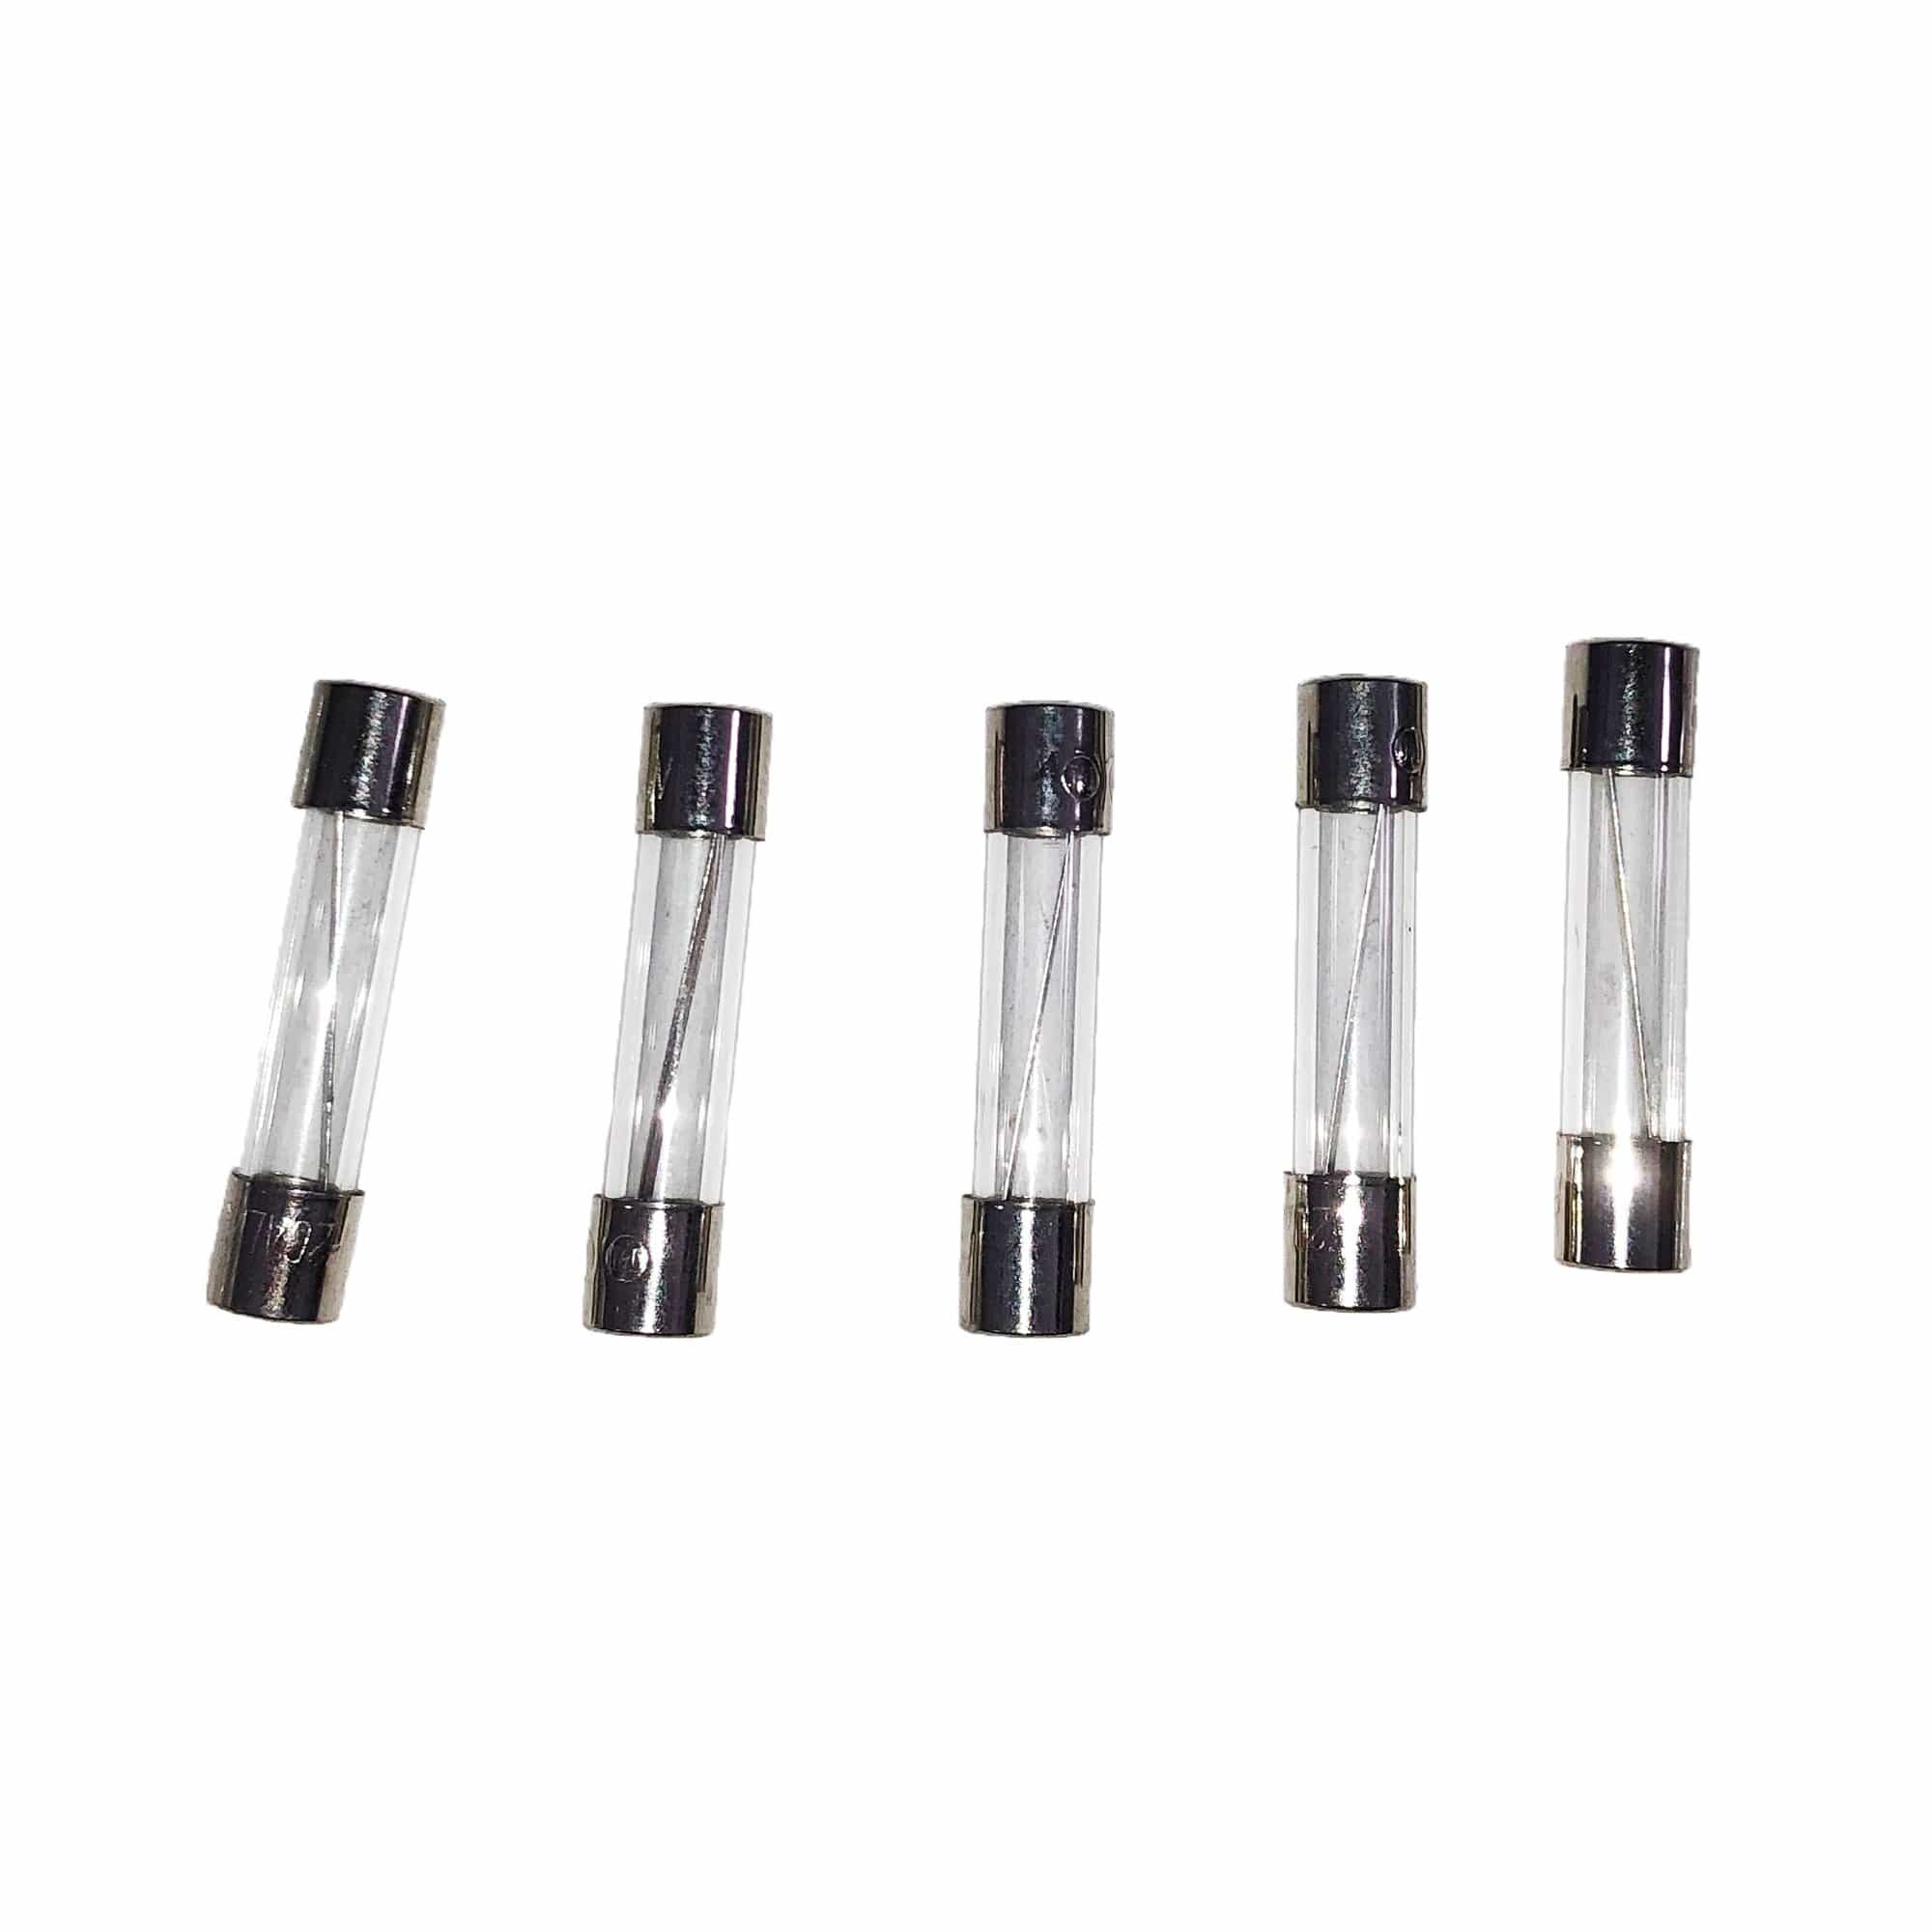 Powerbright F10A 10 Amp Glass Fuse 5 Pack